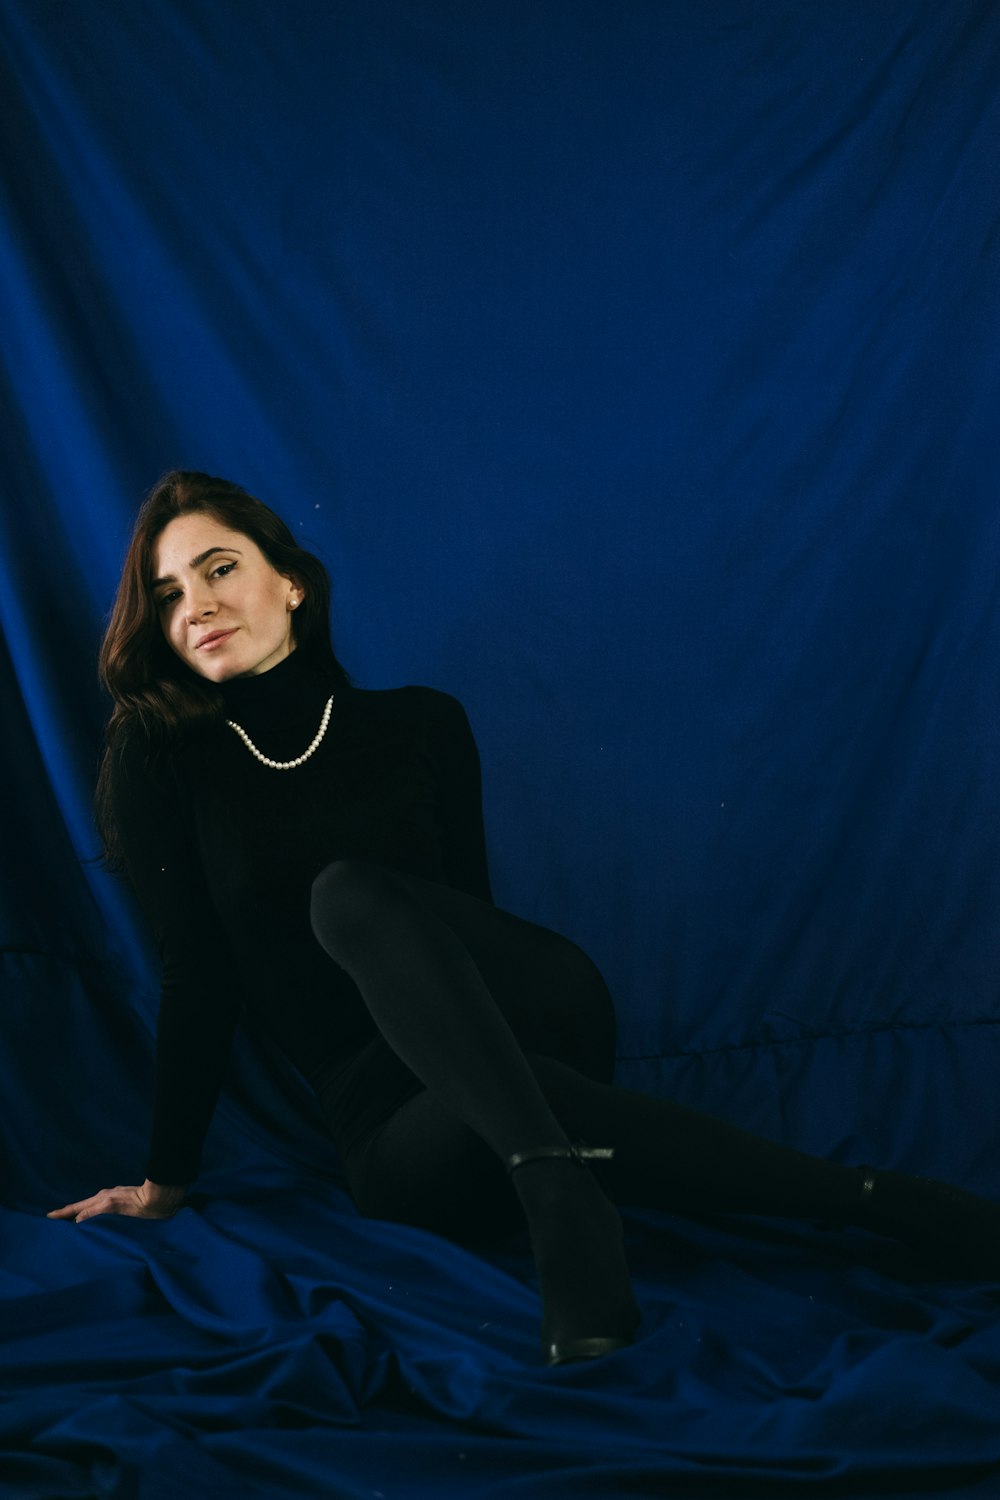 woman in black long sleeve shirt and black pants sitting on blue textile